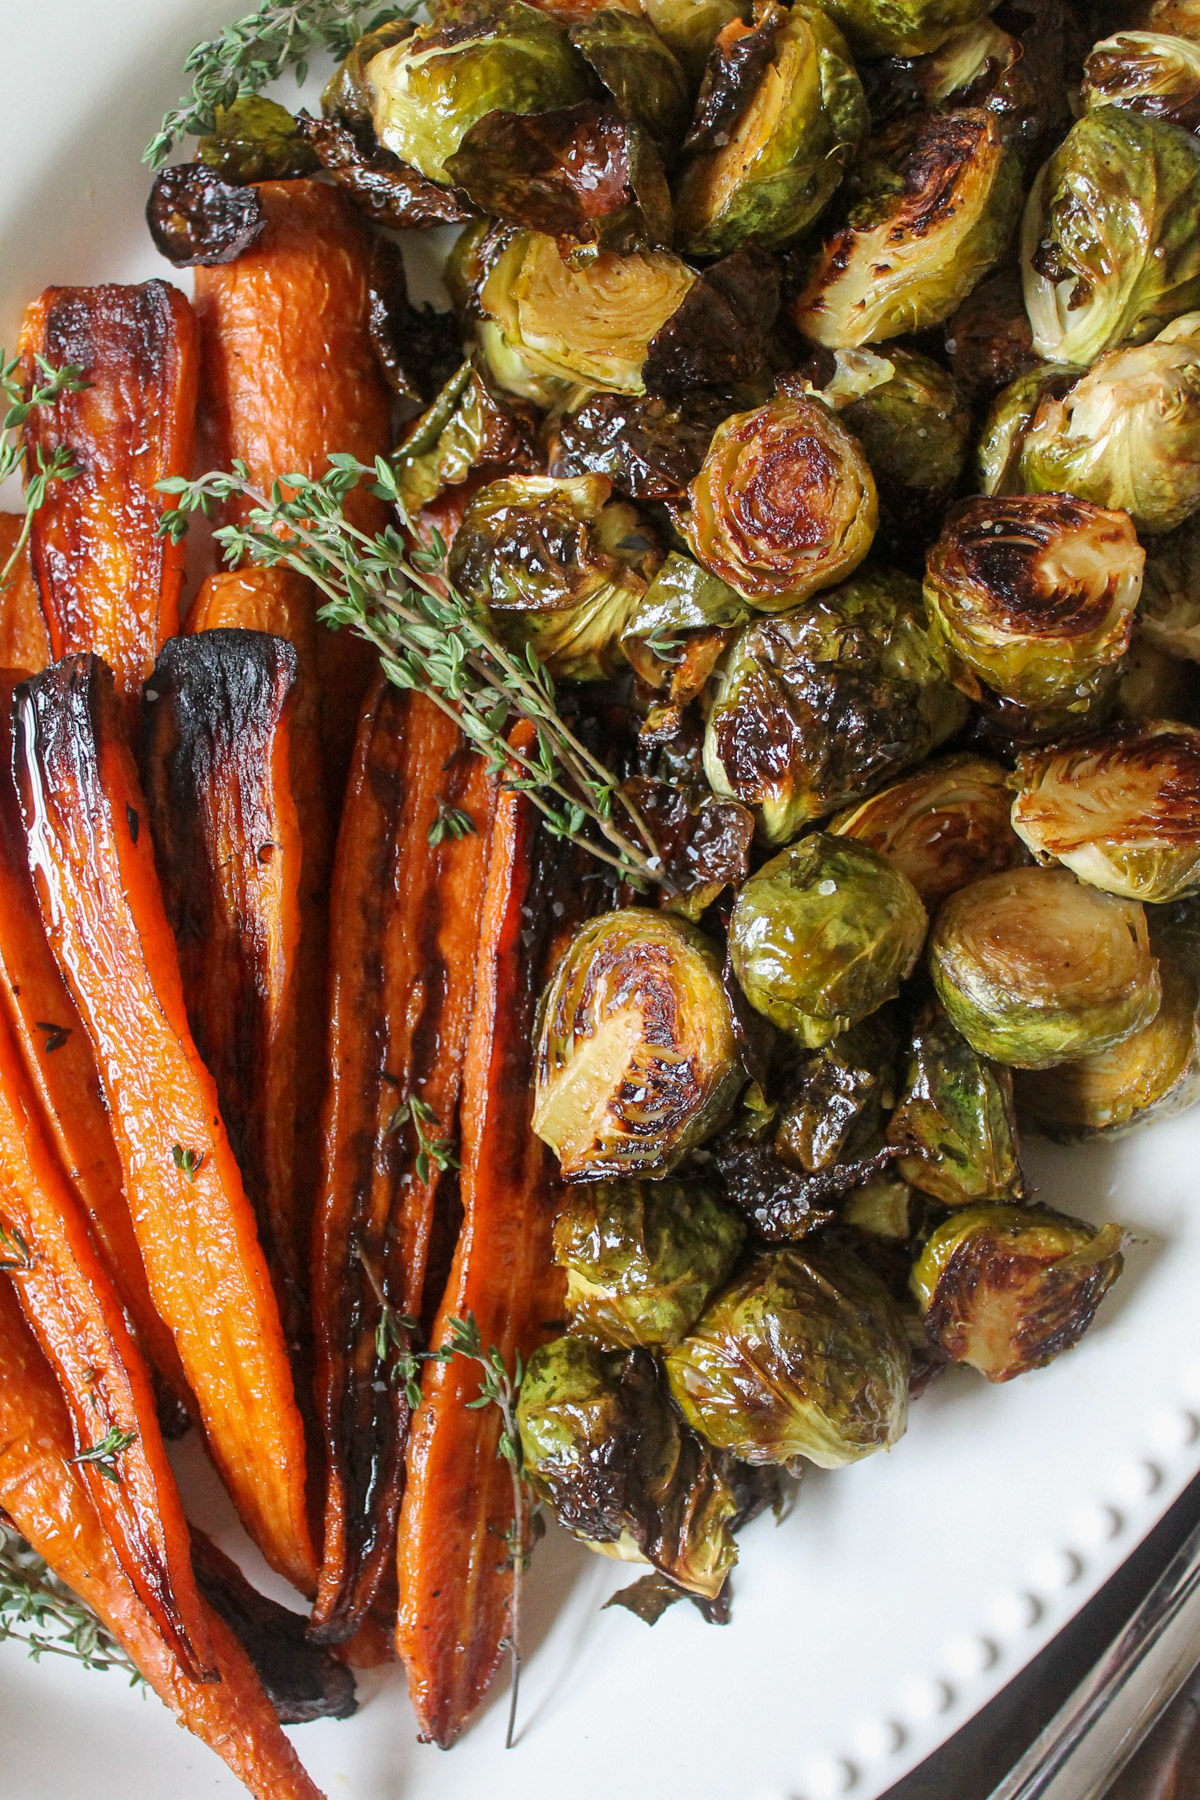 A platter of honey roasted Brussel sprouts and carrots.